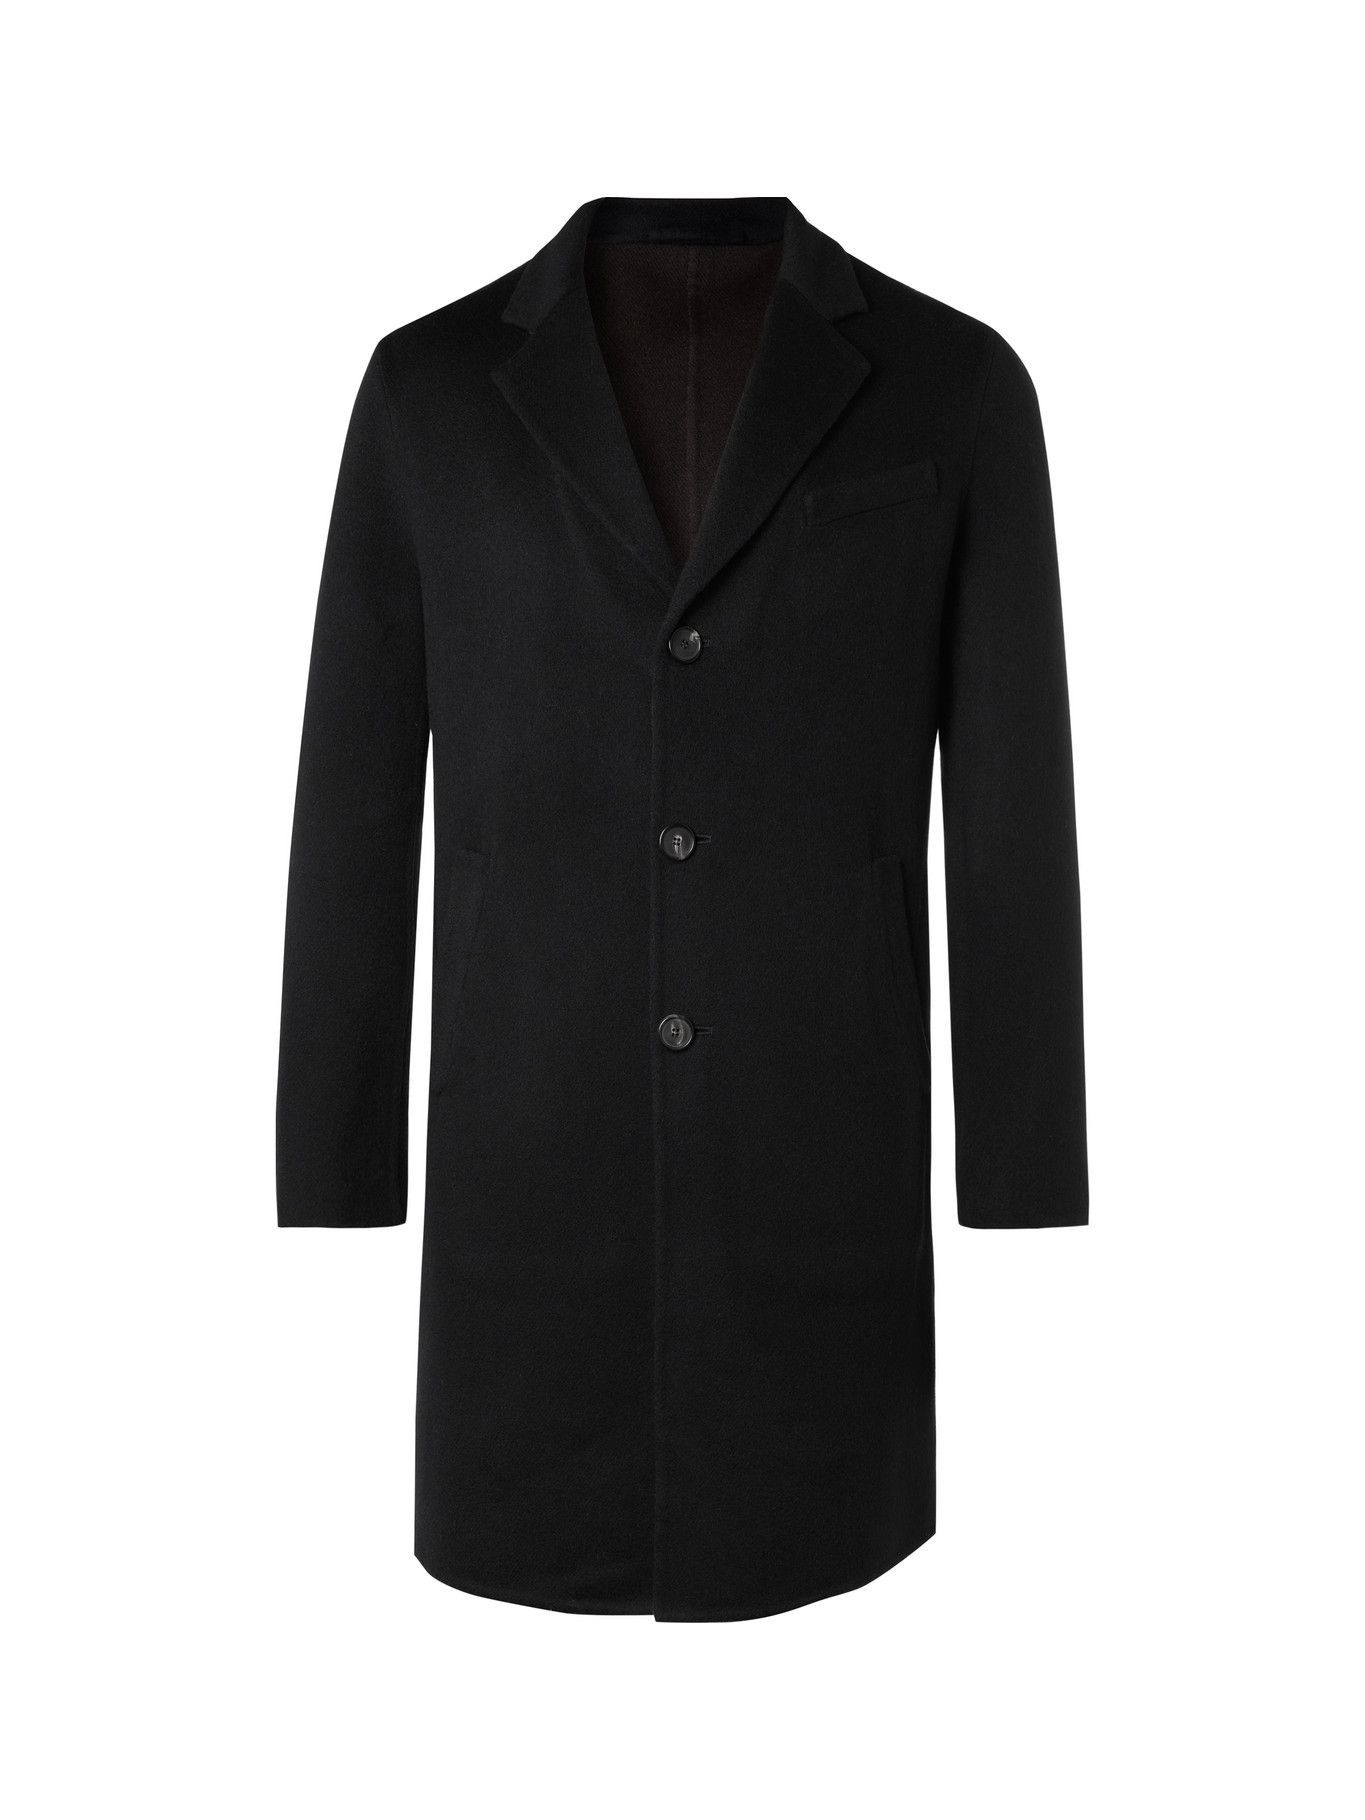 THOM SWEENEY - Slim-Fit Double-Faced Cashmere Overcoat - Blue Thom Sweeney